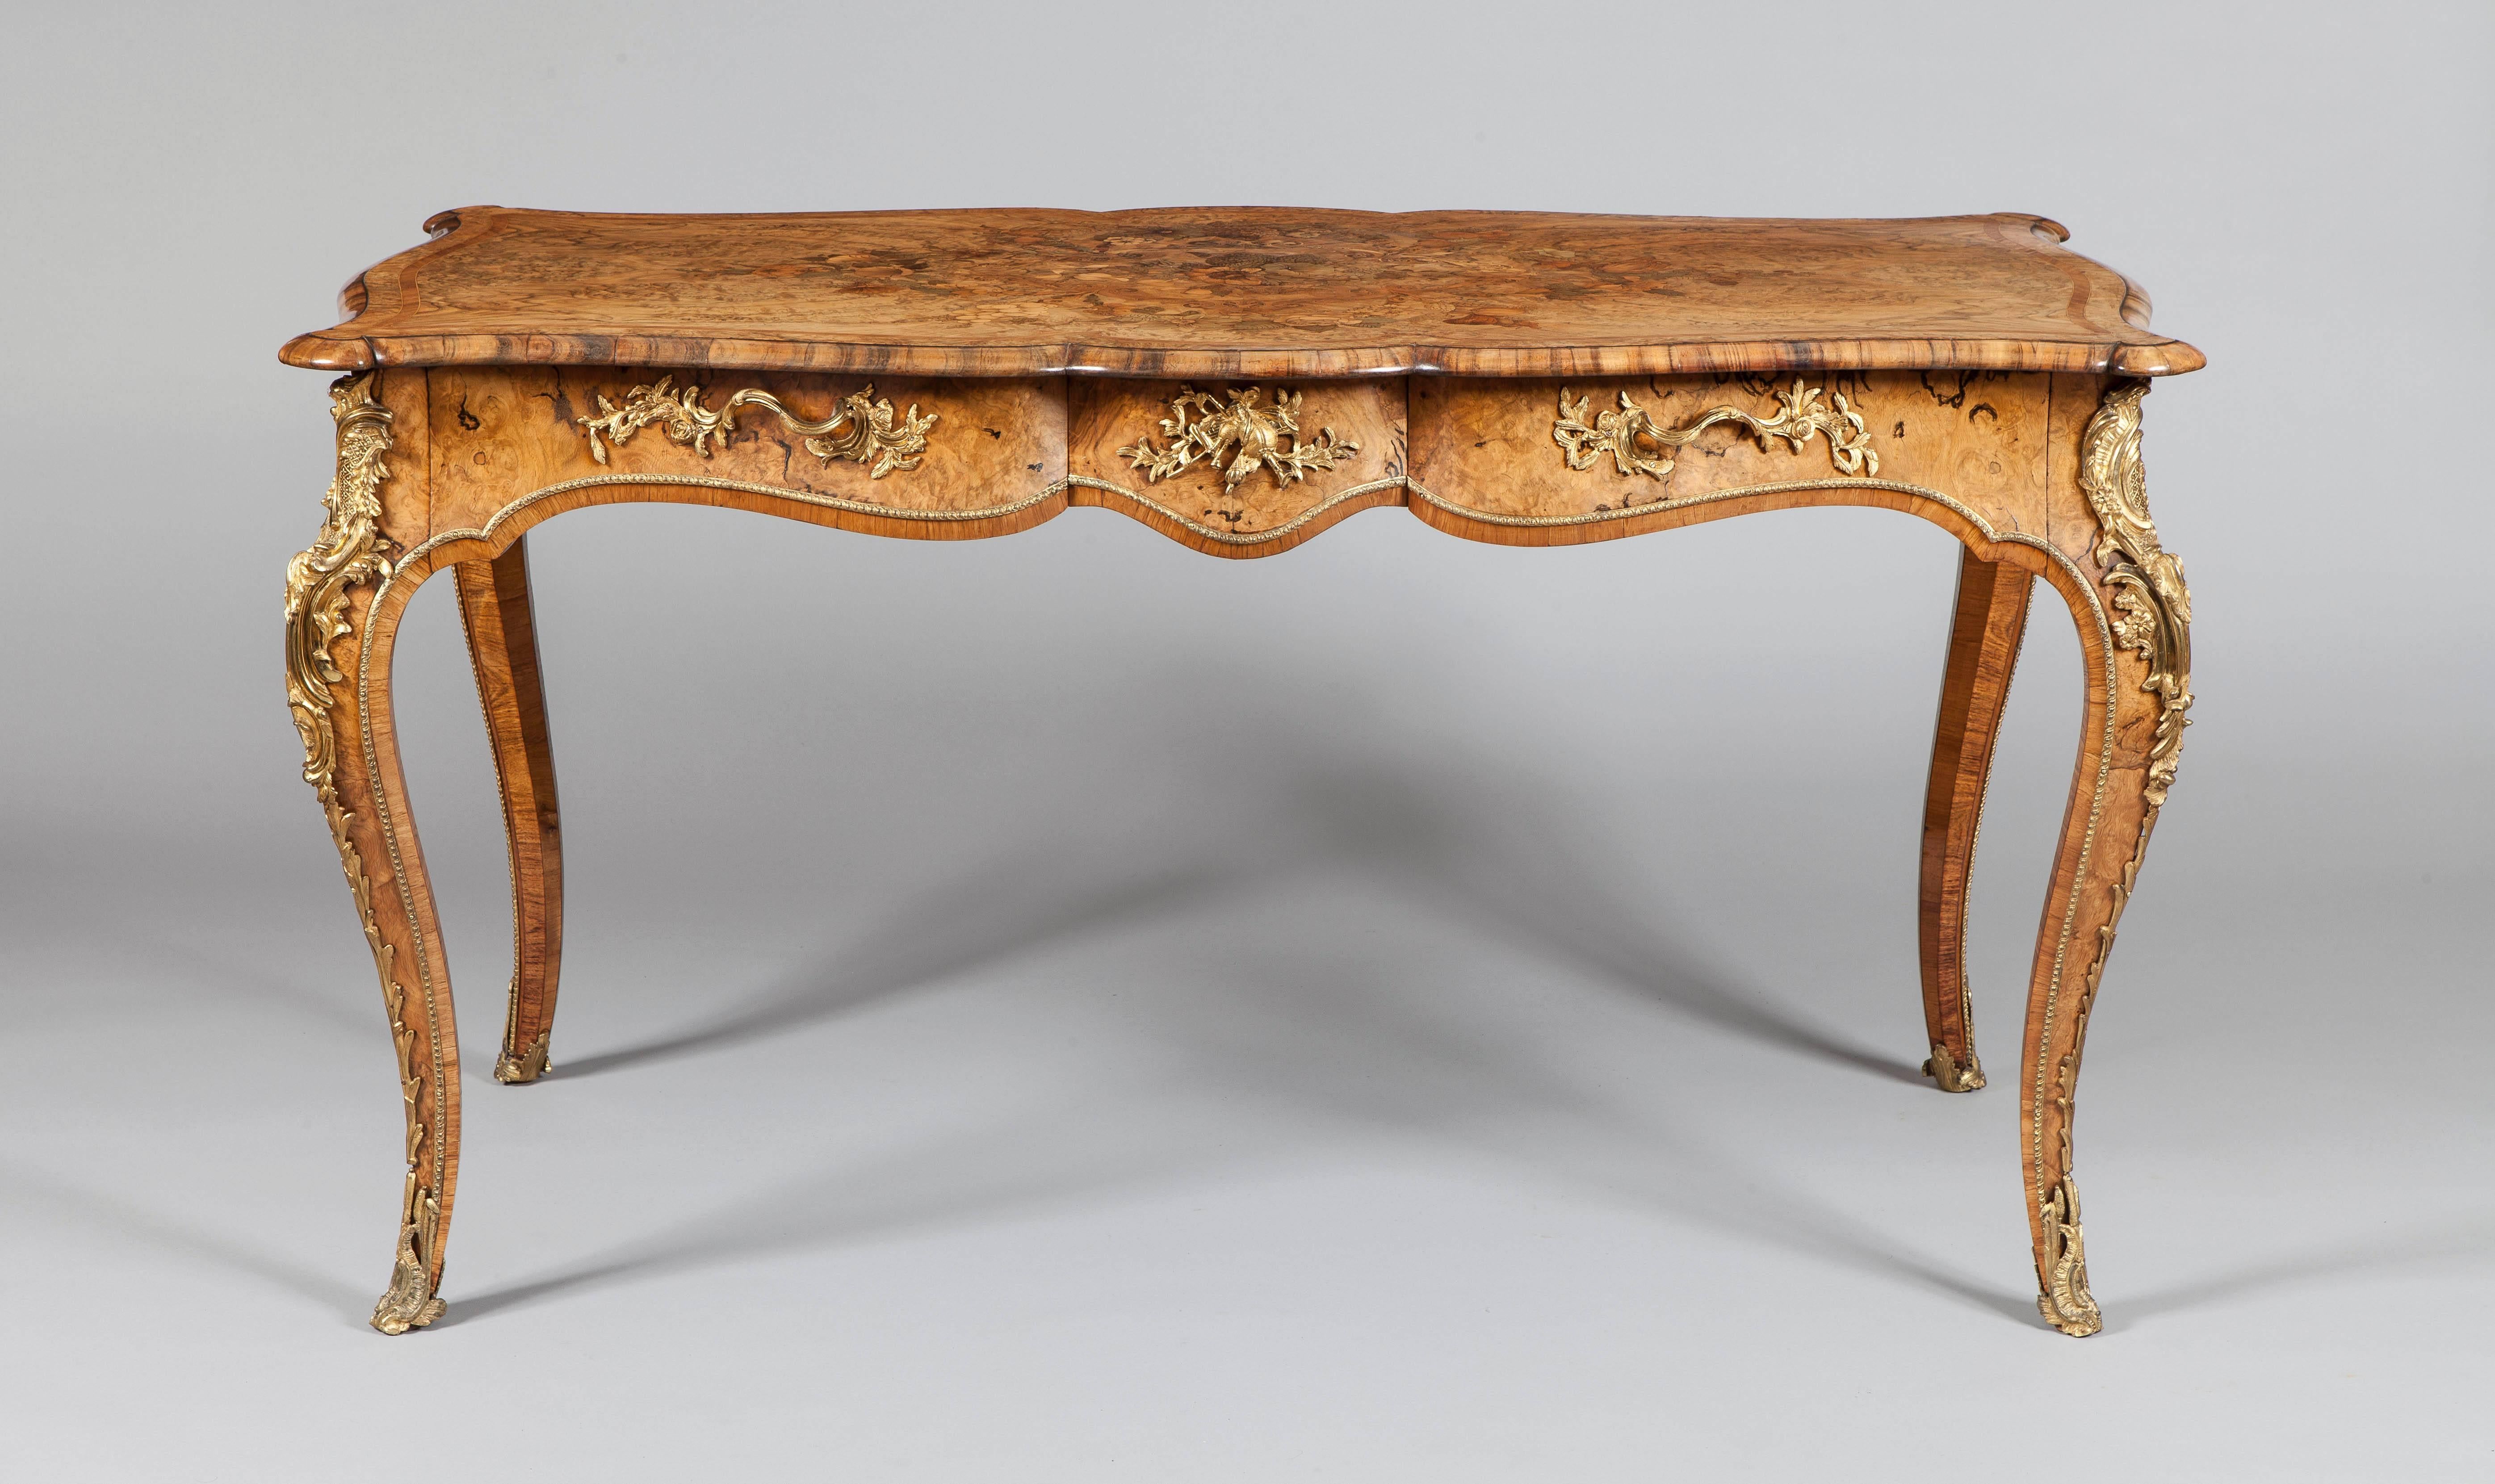 Louis XV English Writing Table with Floral Marquetry and Gilt Bronze Mounts by Gillow